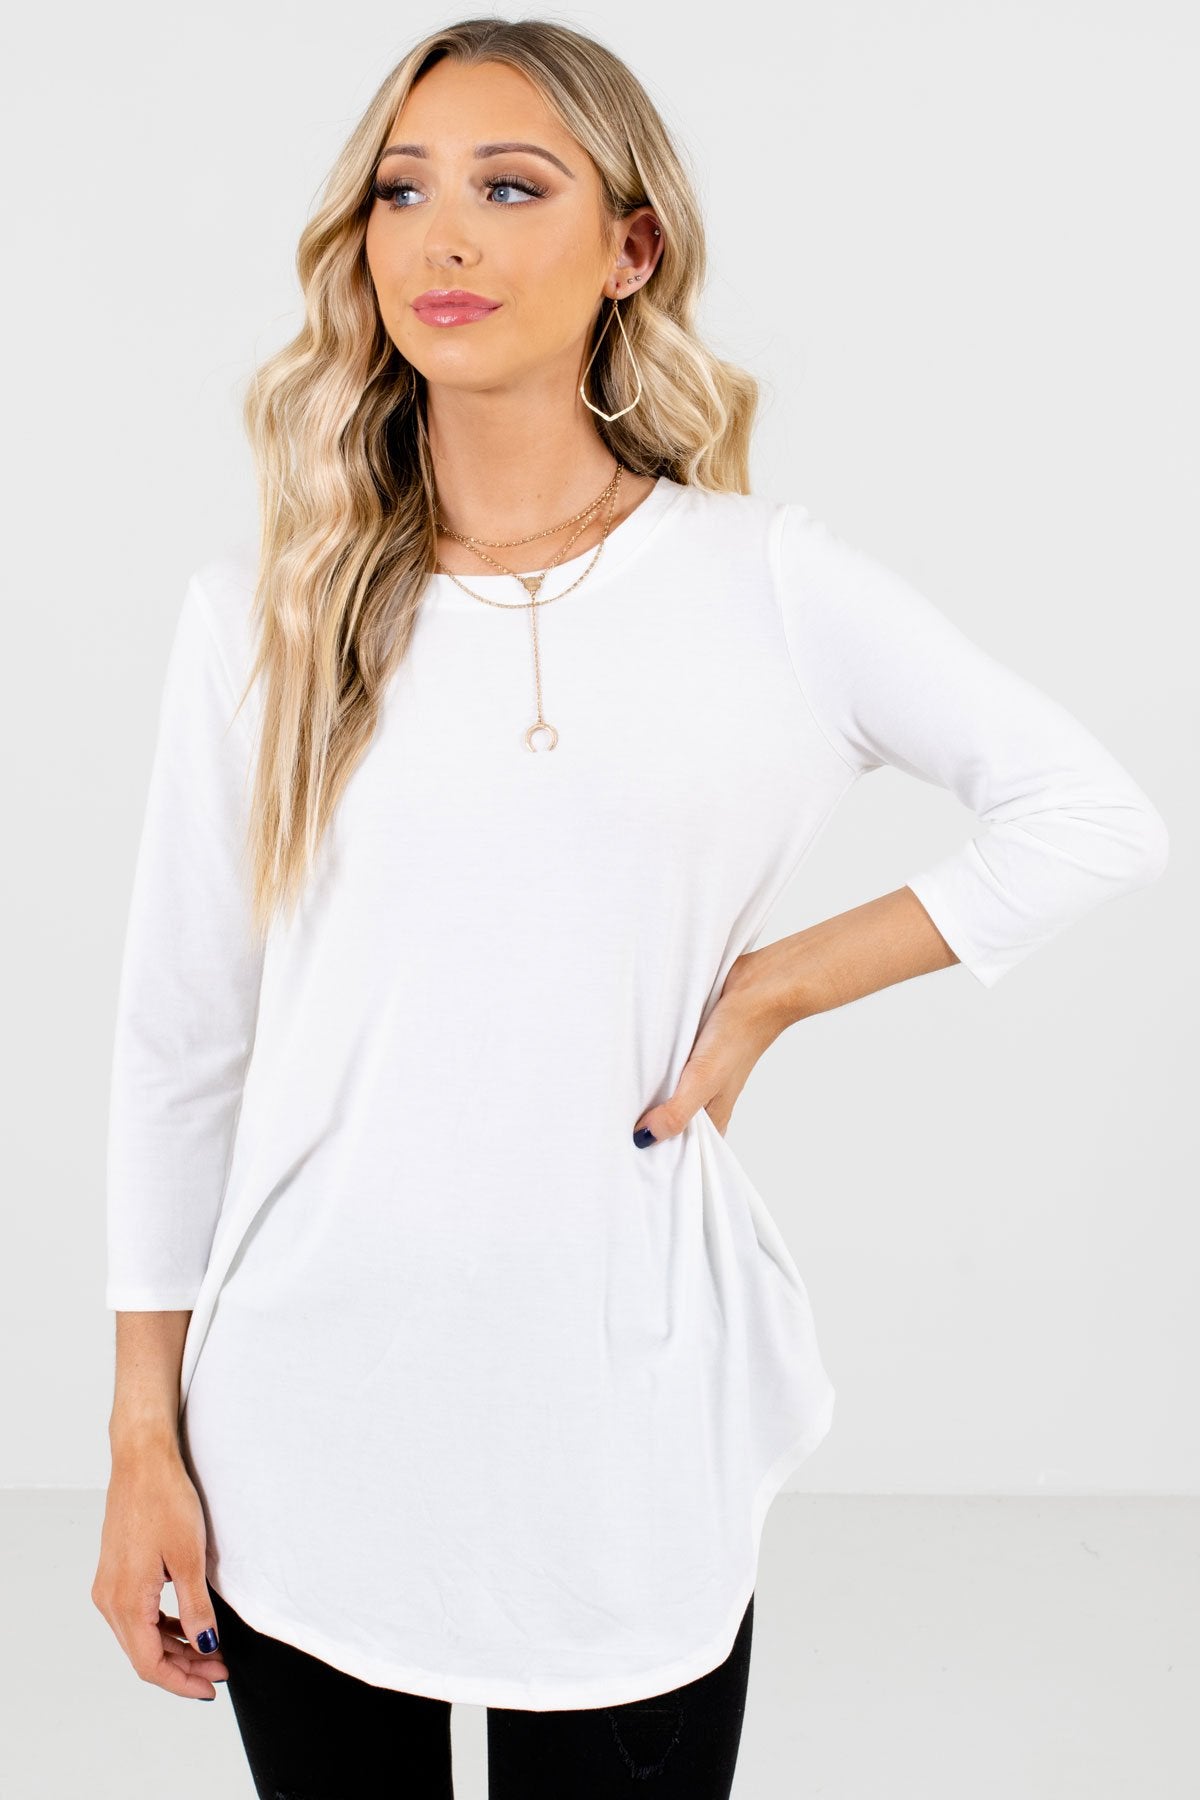 White Boutique Layering Tops for Women